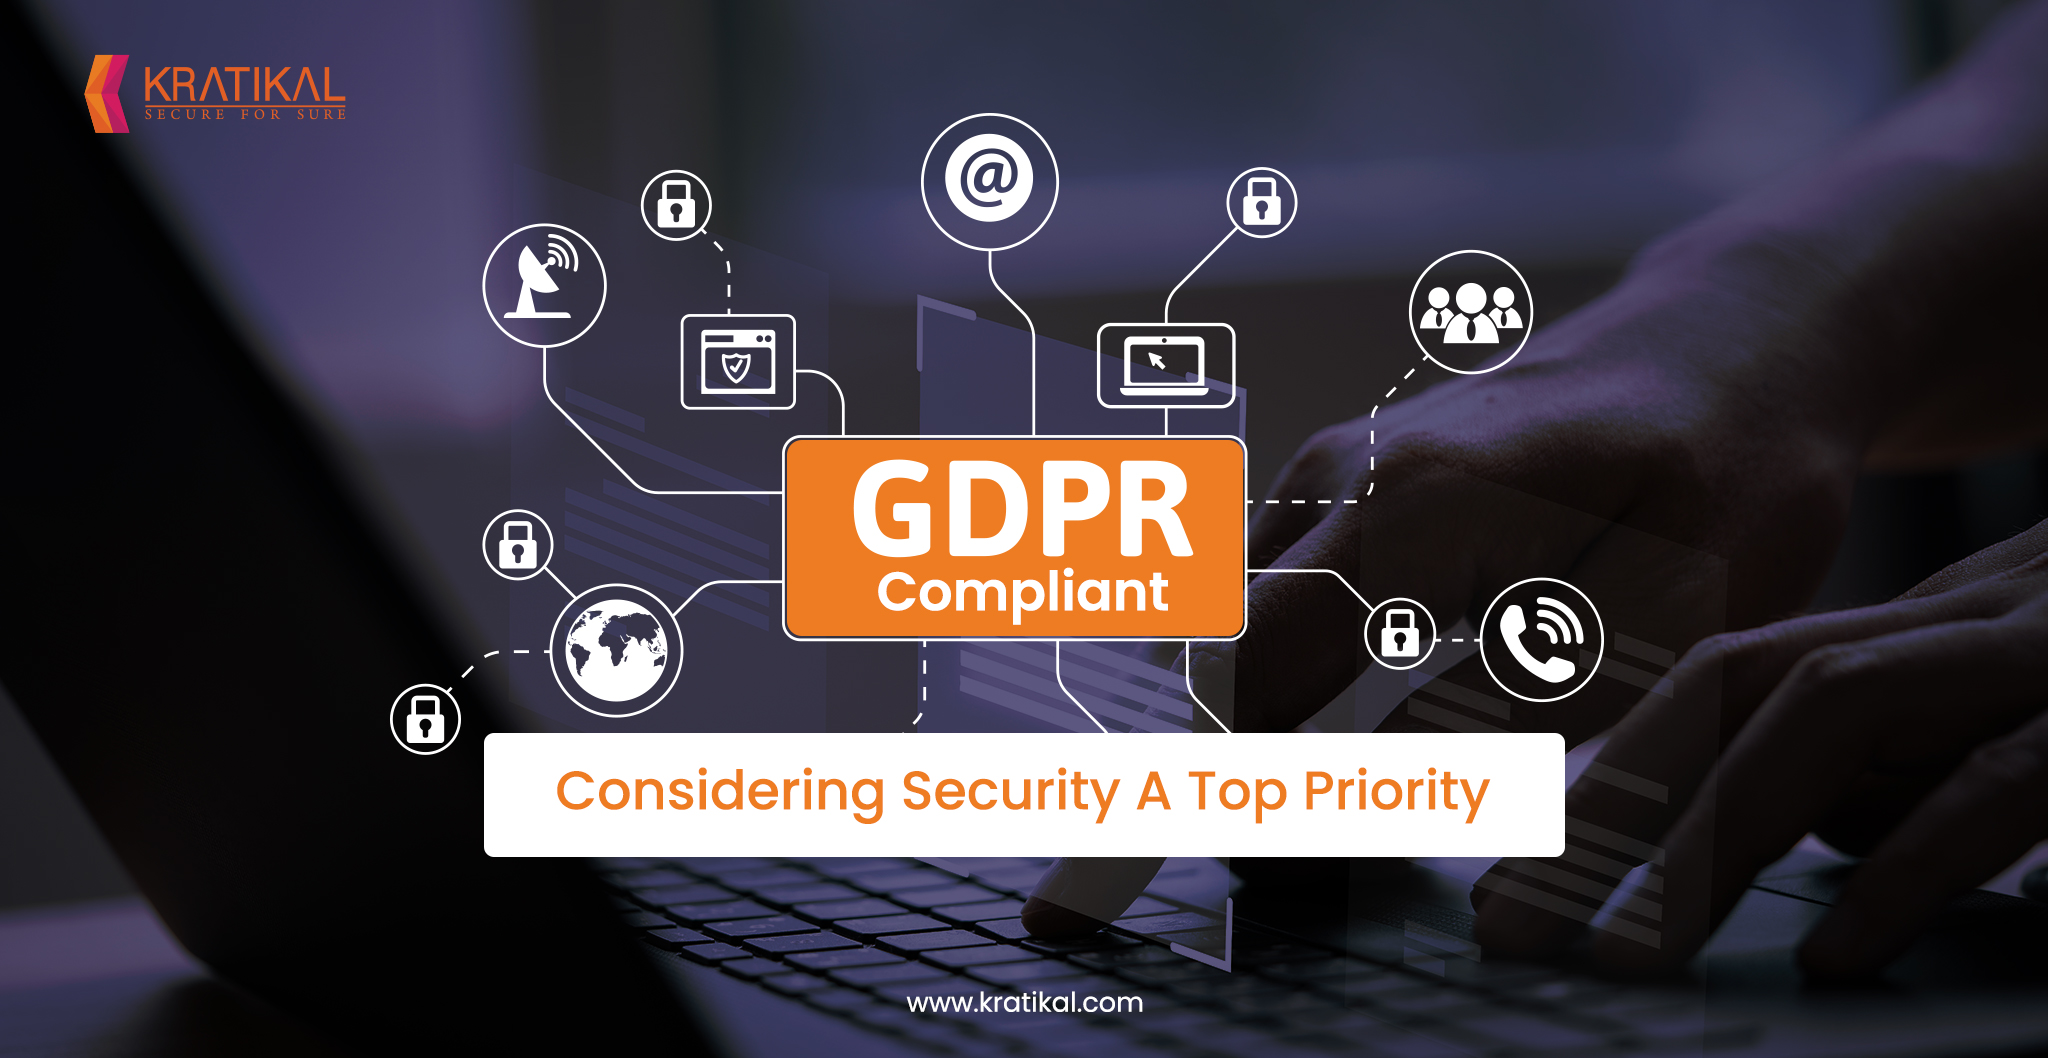 GDPR Compliant - Considering Security A Top Priority